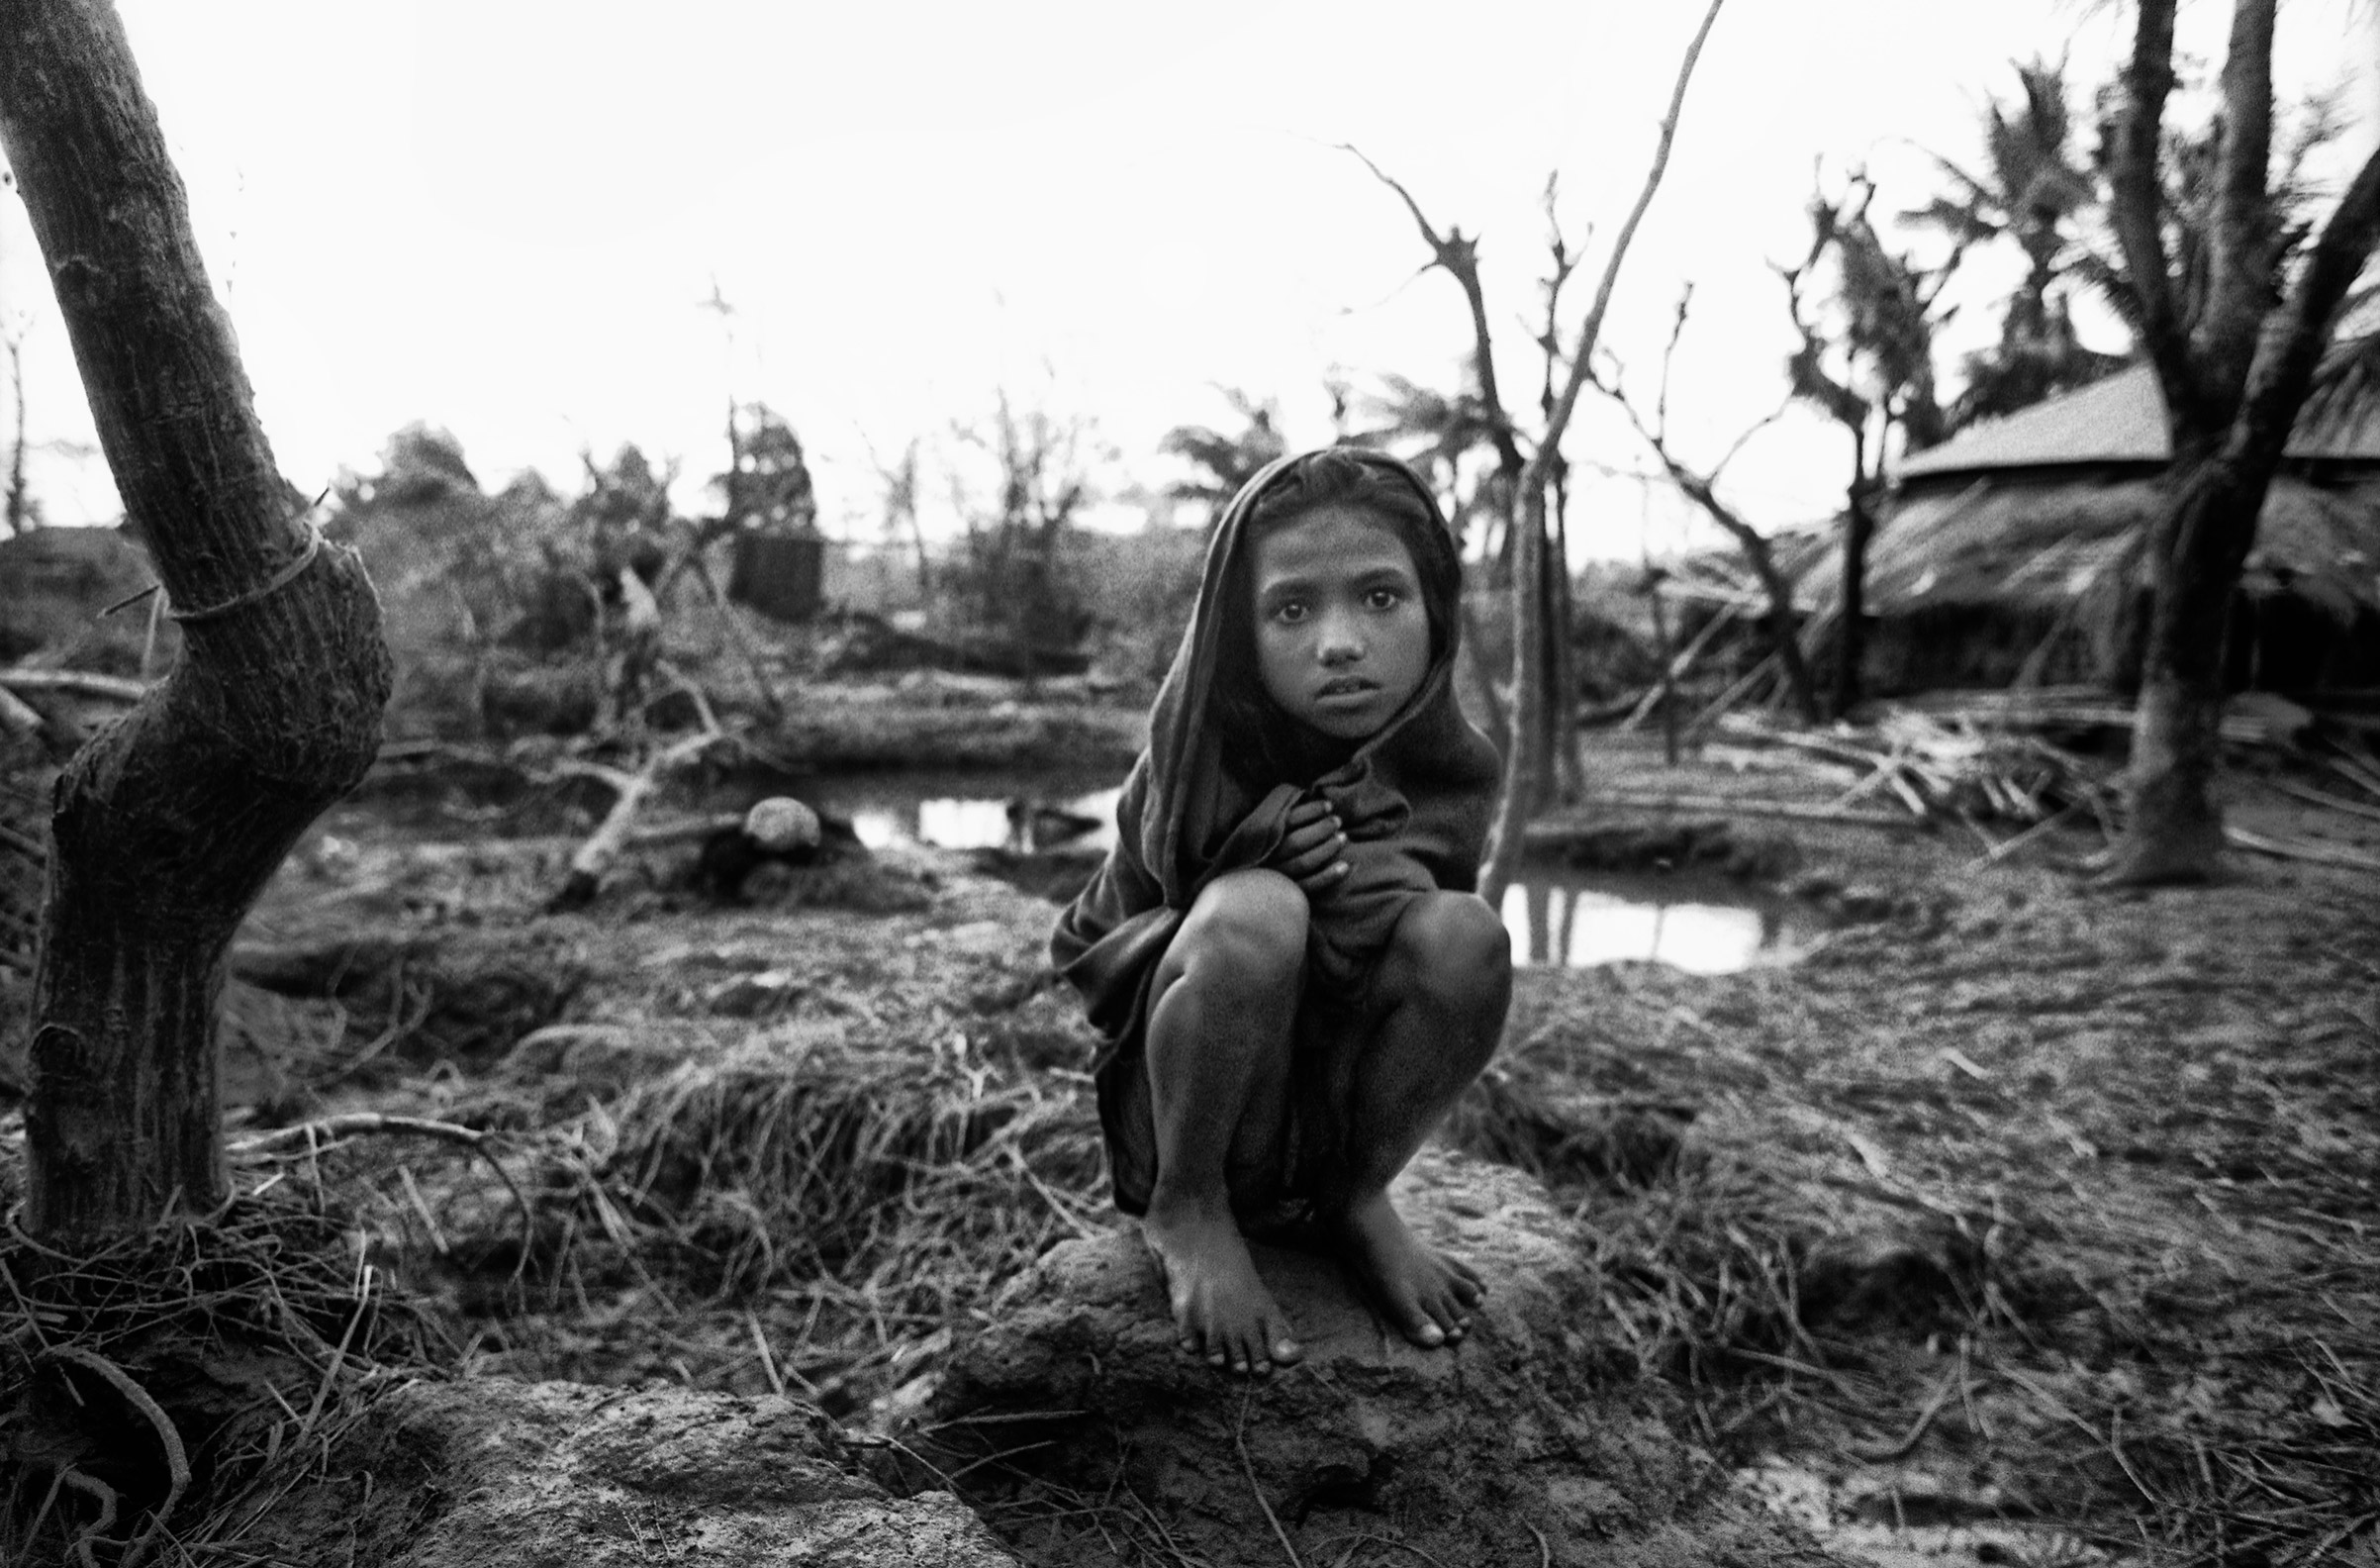 A girl crouches near the remains of her home in the aftermath of a deadly storm in Anwara, Chittagong, Bangladesh, 1991. (Shahidul Alam—Drik)